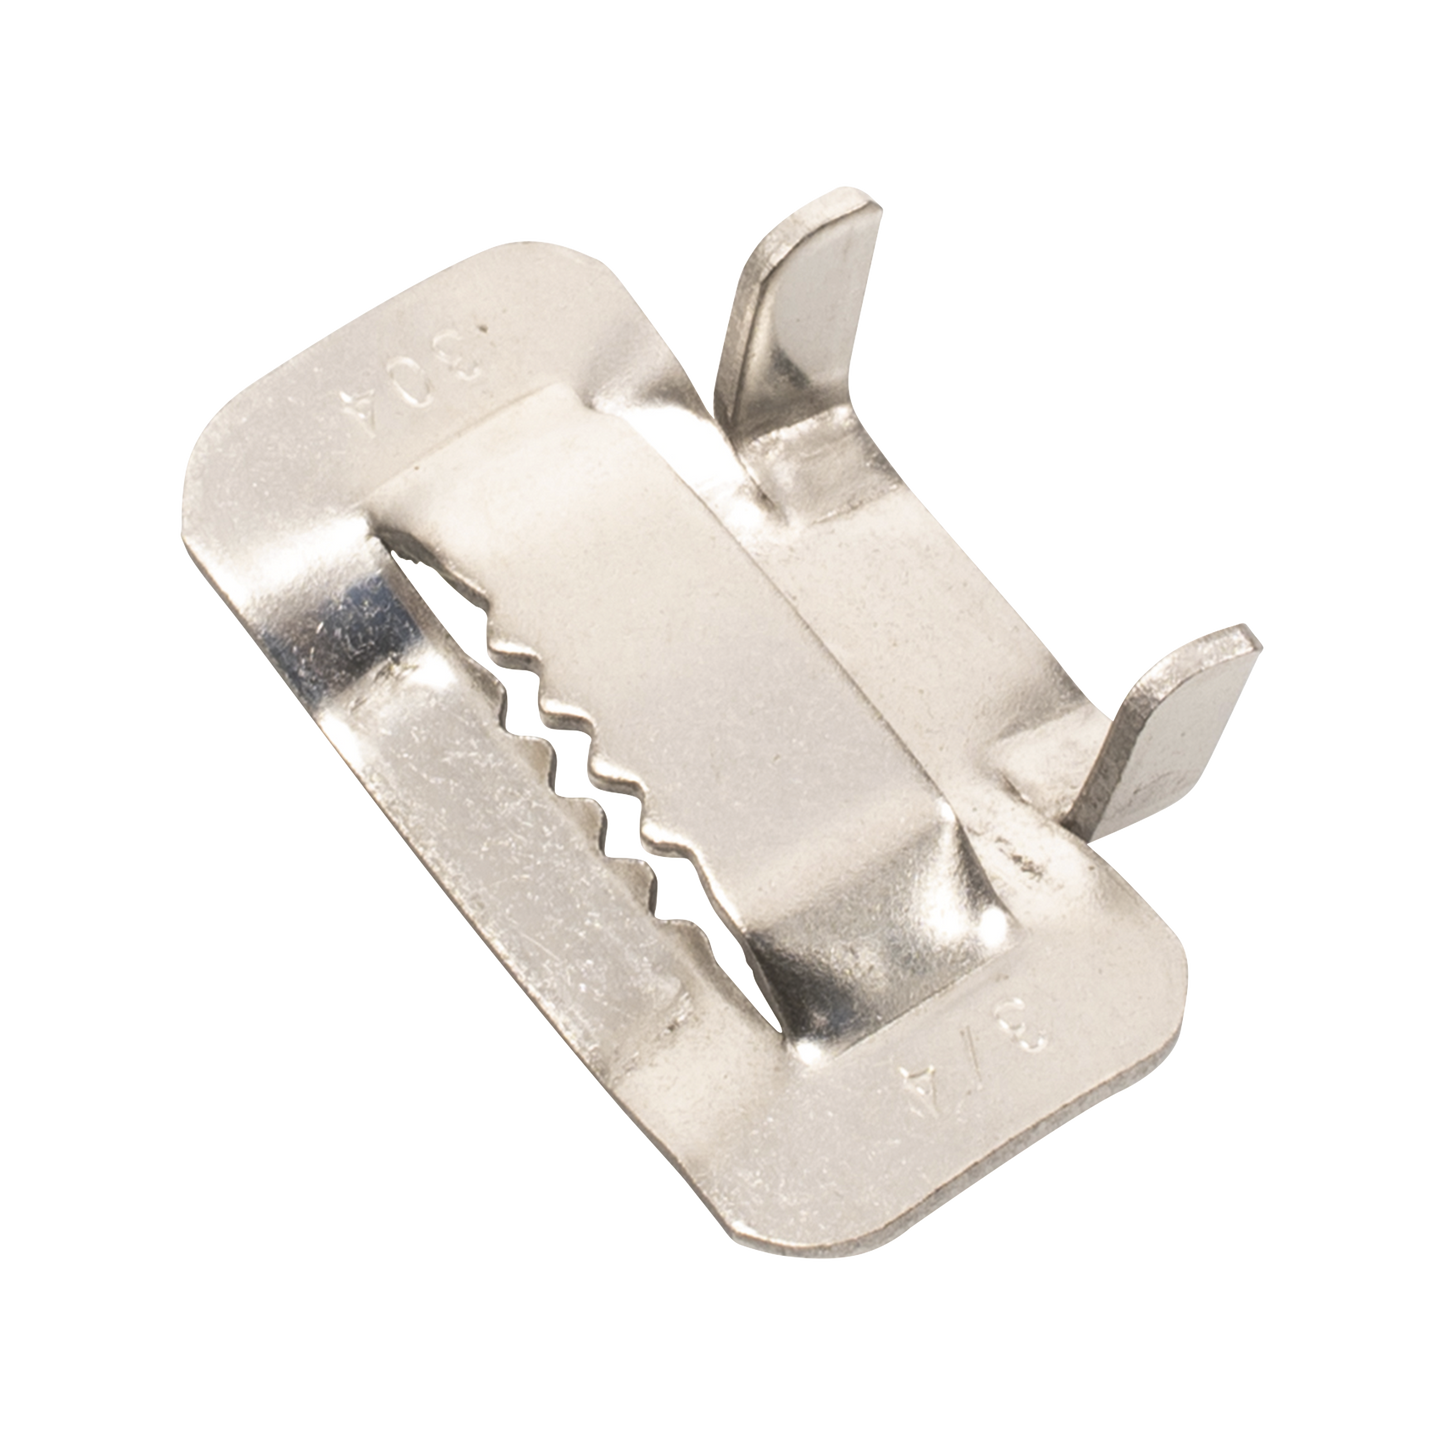 Stainless Steel Buckle Tooth Type, 3/4", 100 pieces